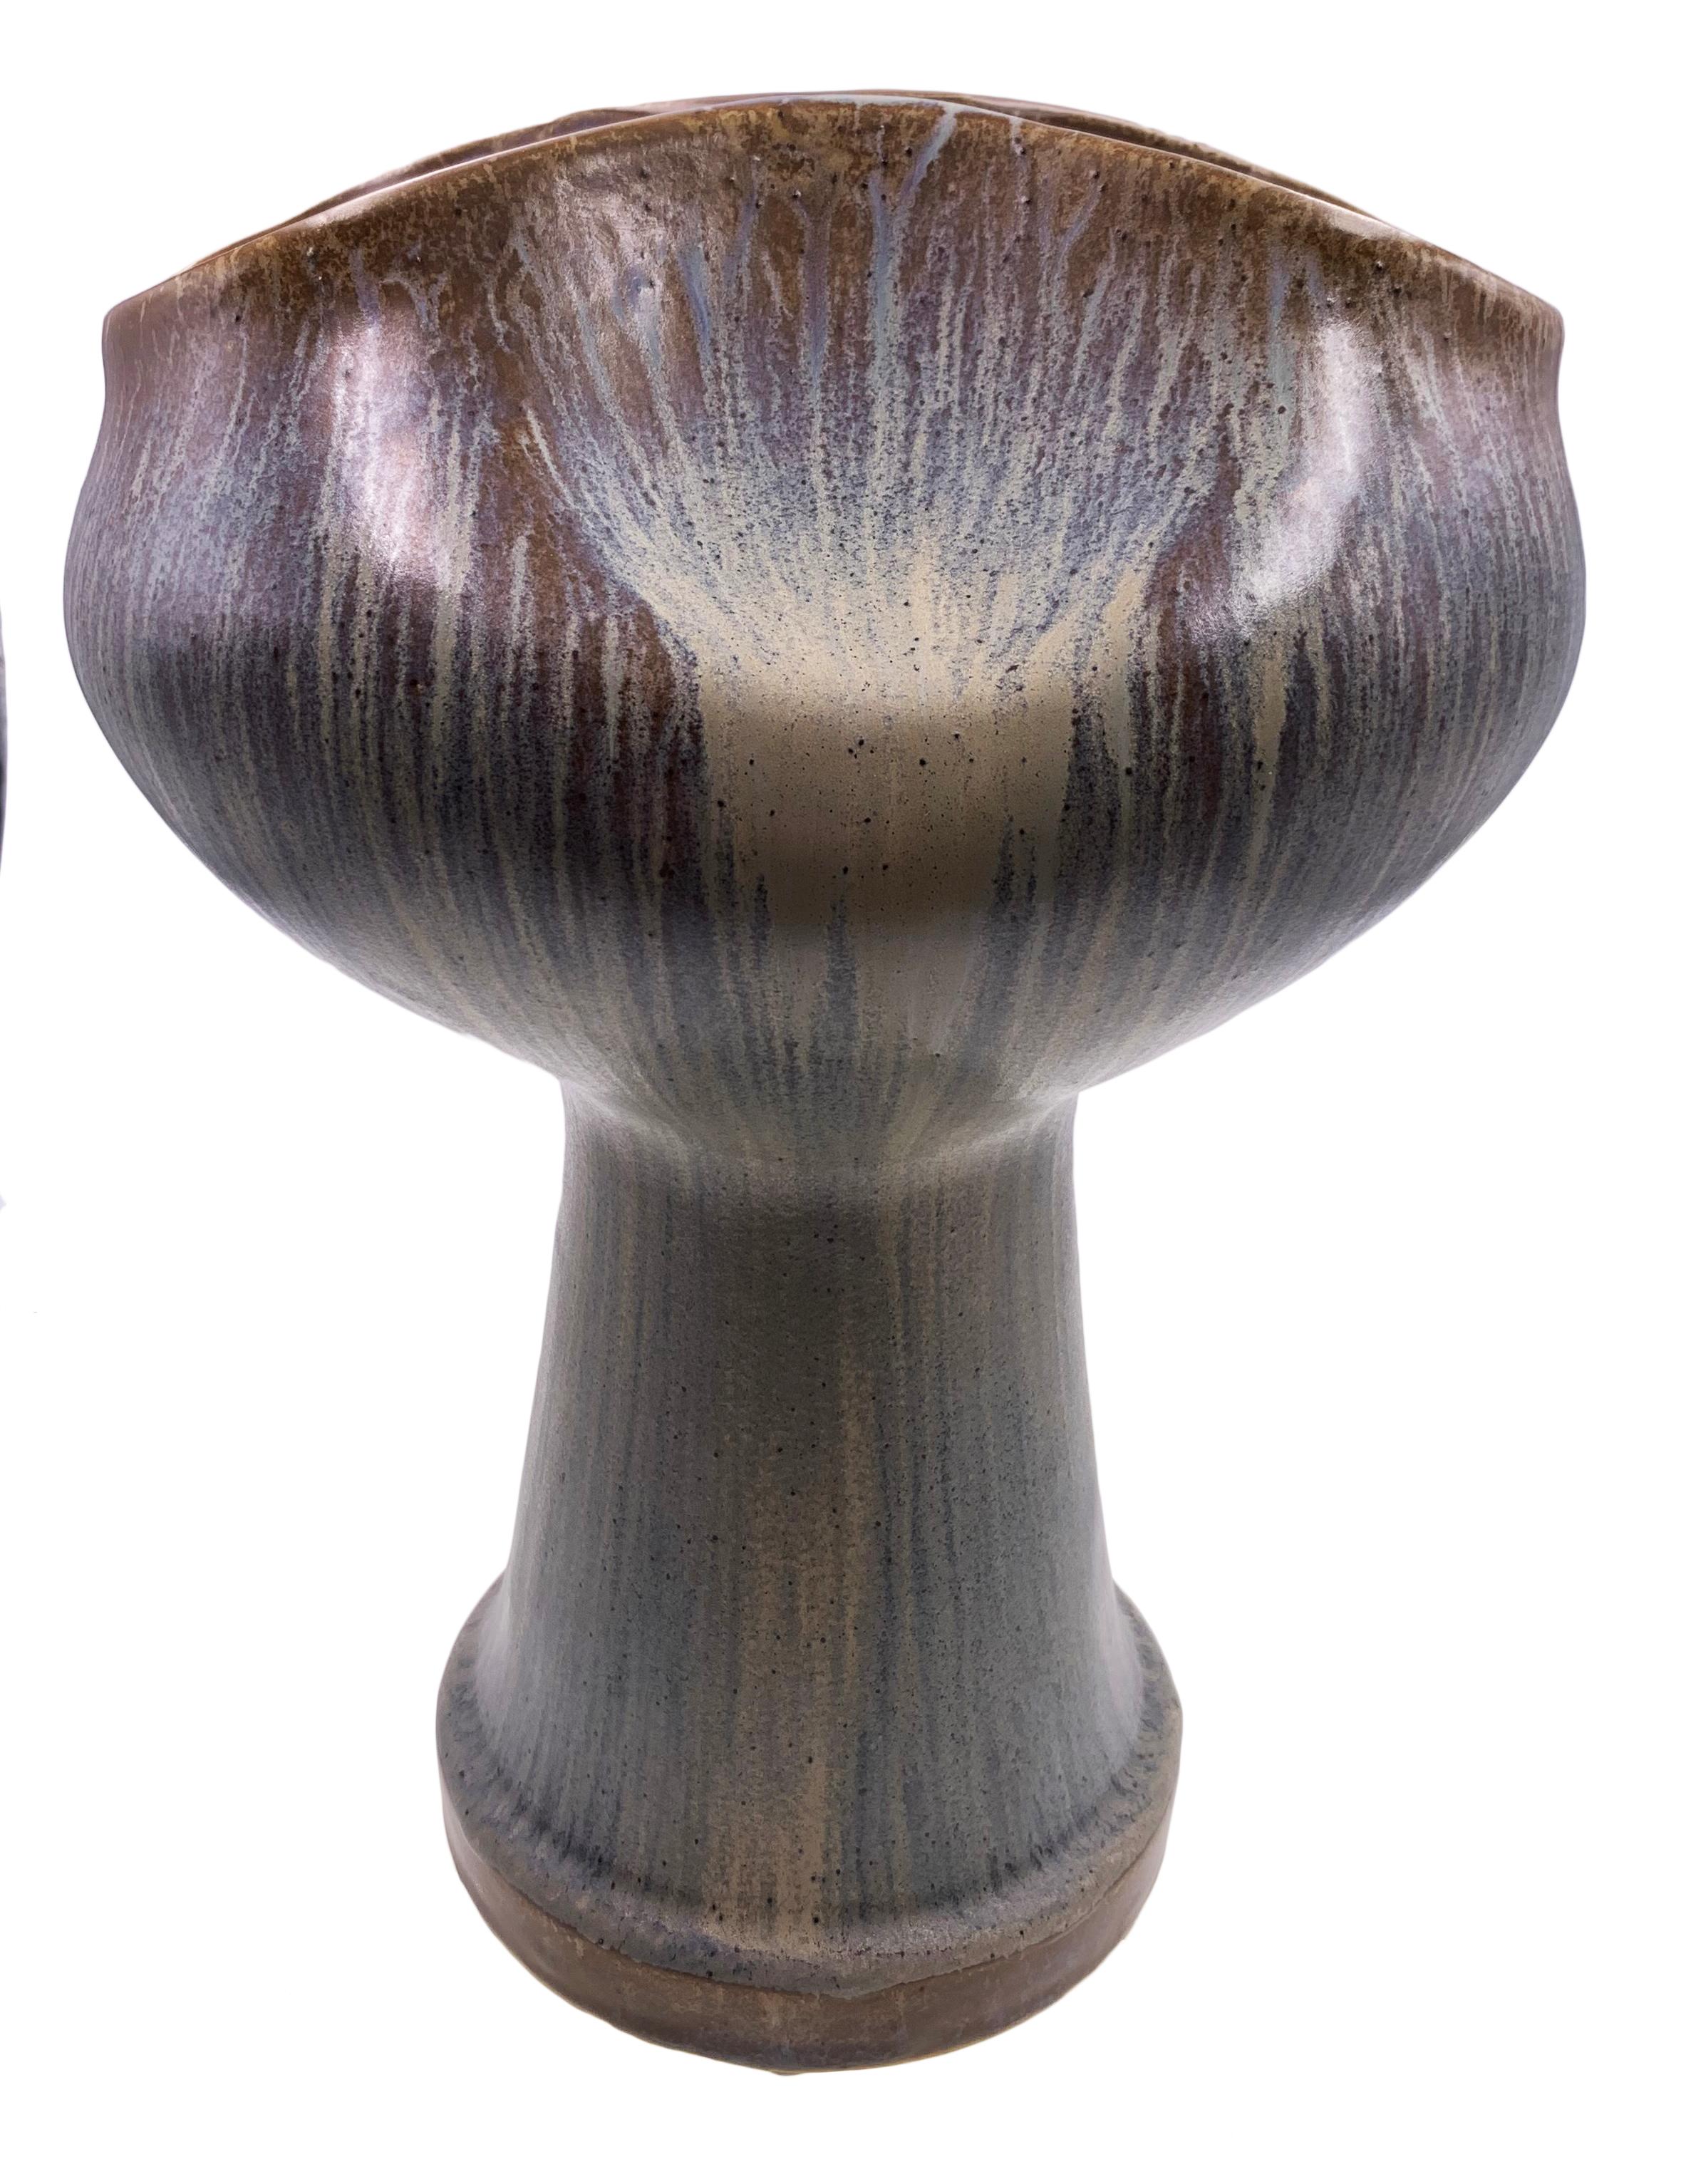 Description: Ceramic vase - The Bulb
Size: 19 x 15 x 26.5H cm
Material: Ceramic
Collection: Mid Century Rhythm
Remark: Each vase is hand made, therefore color nuances may vary from one to another